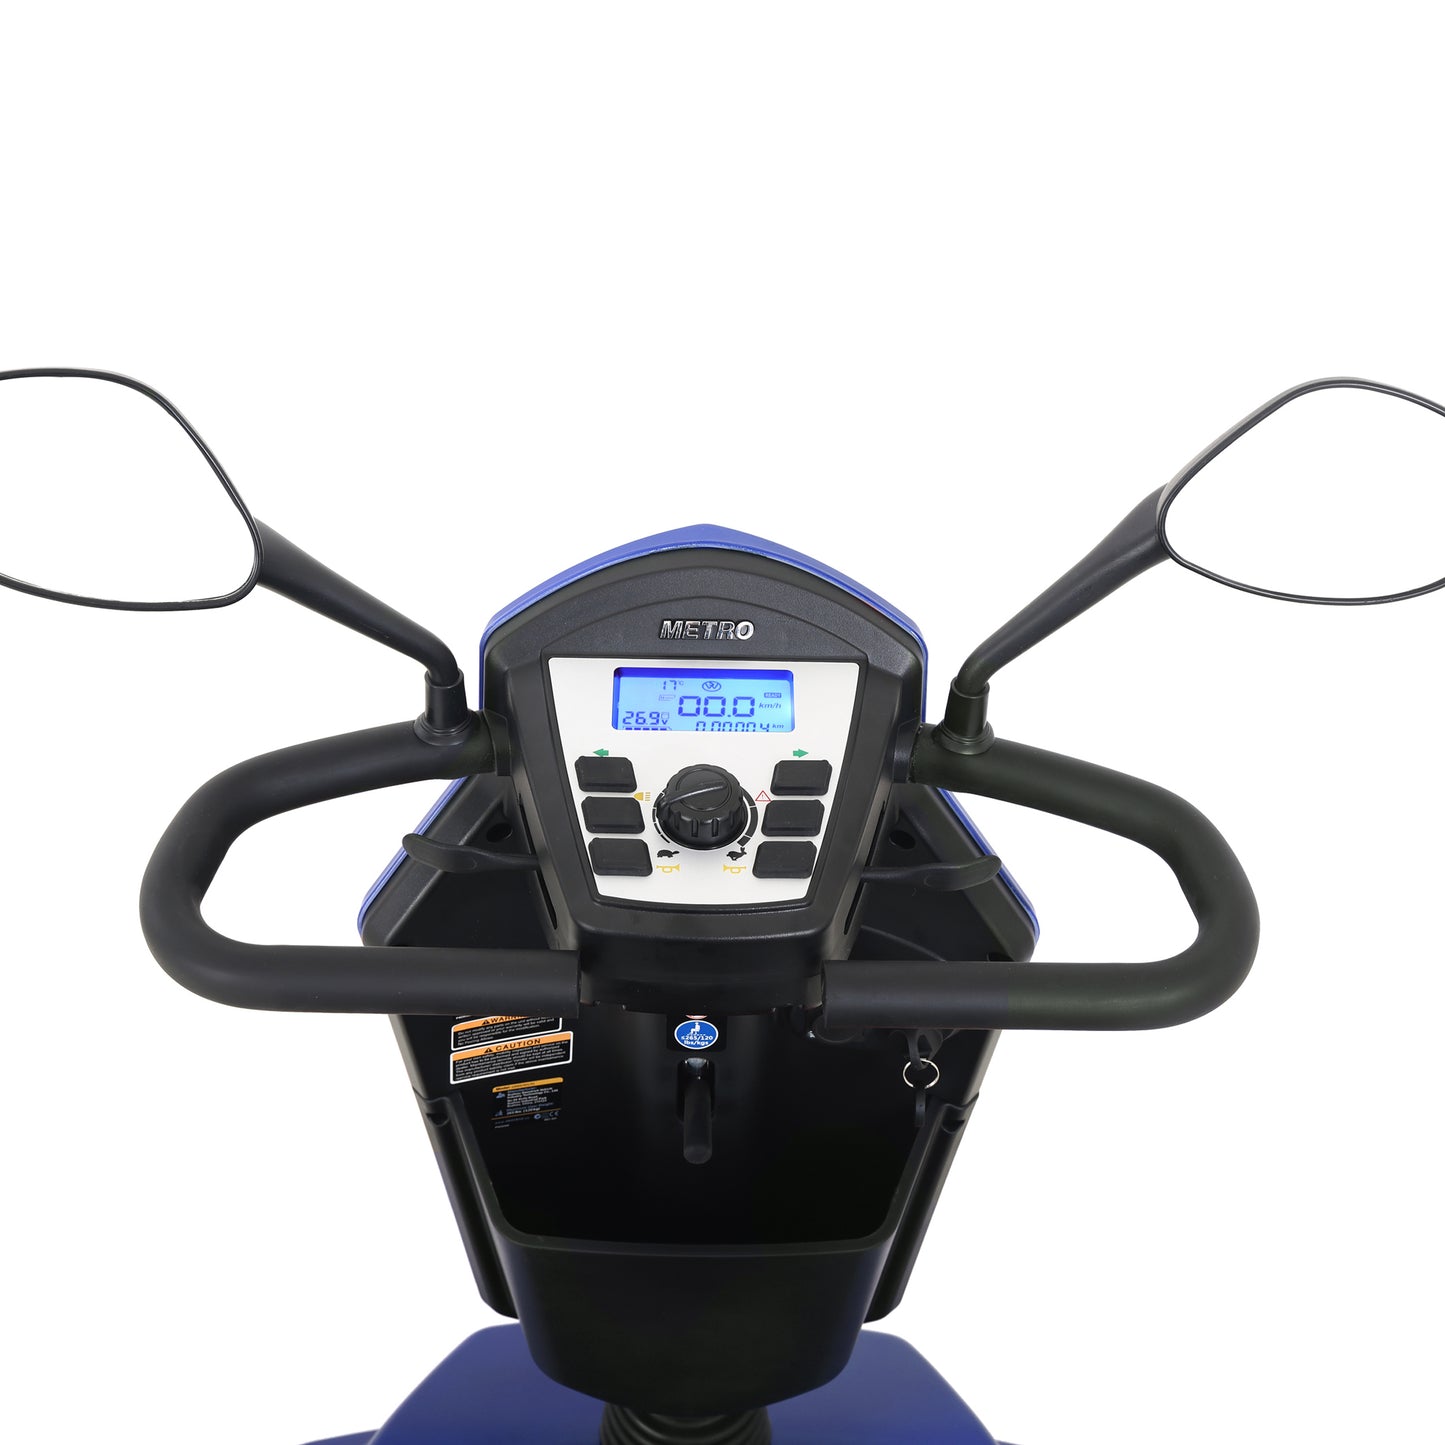 S800-BLUE Heavy Duty Mobility Scooter